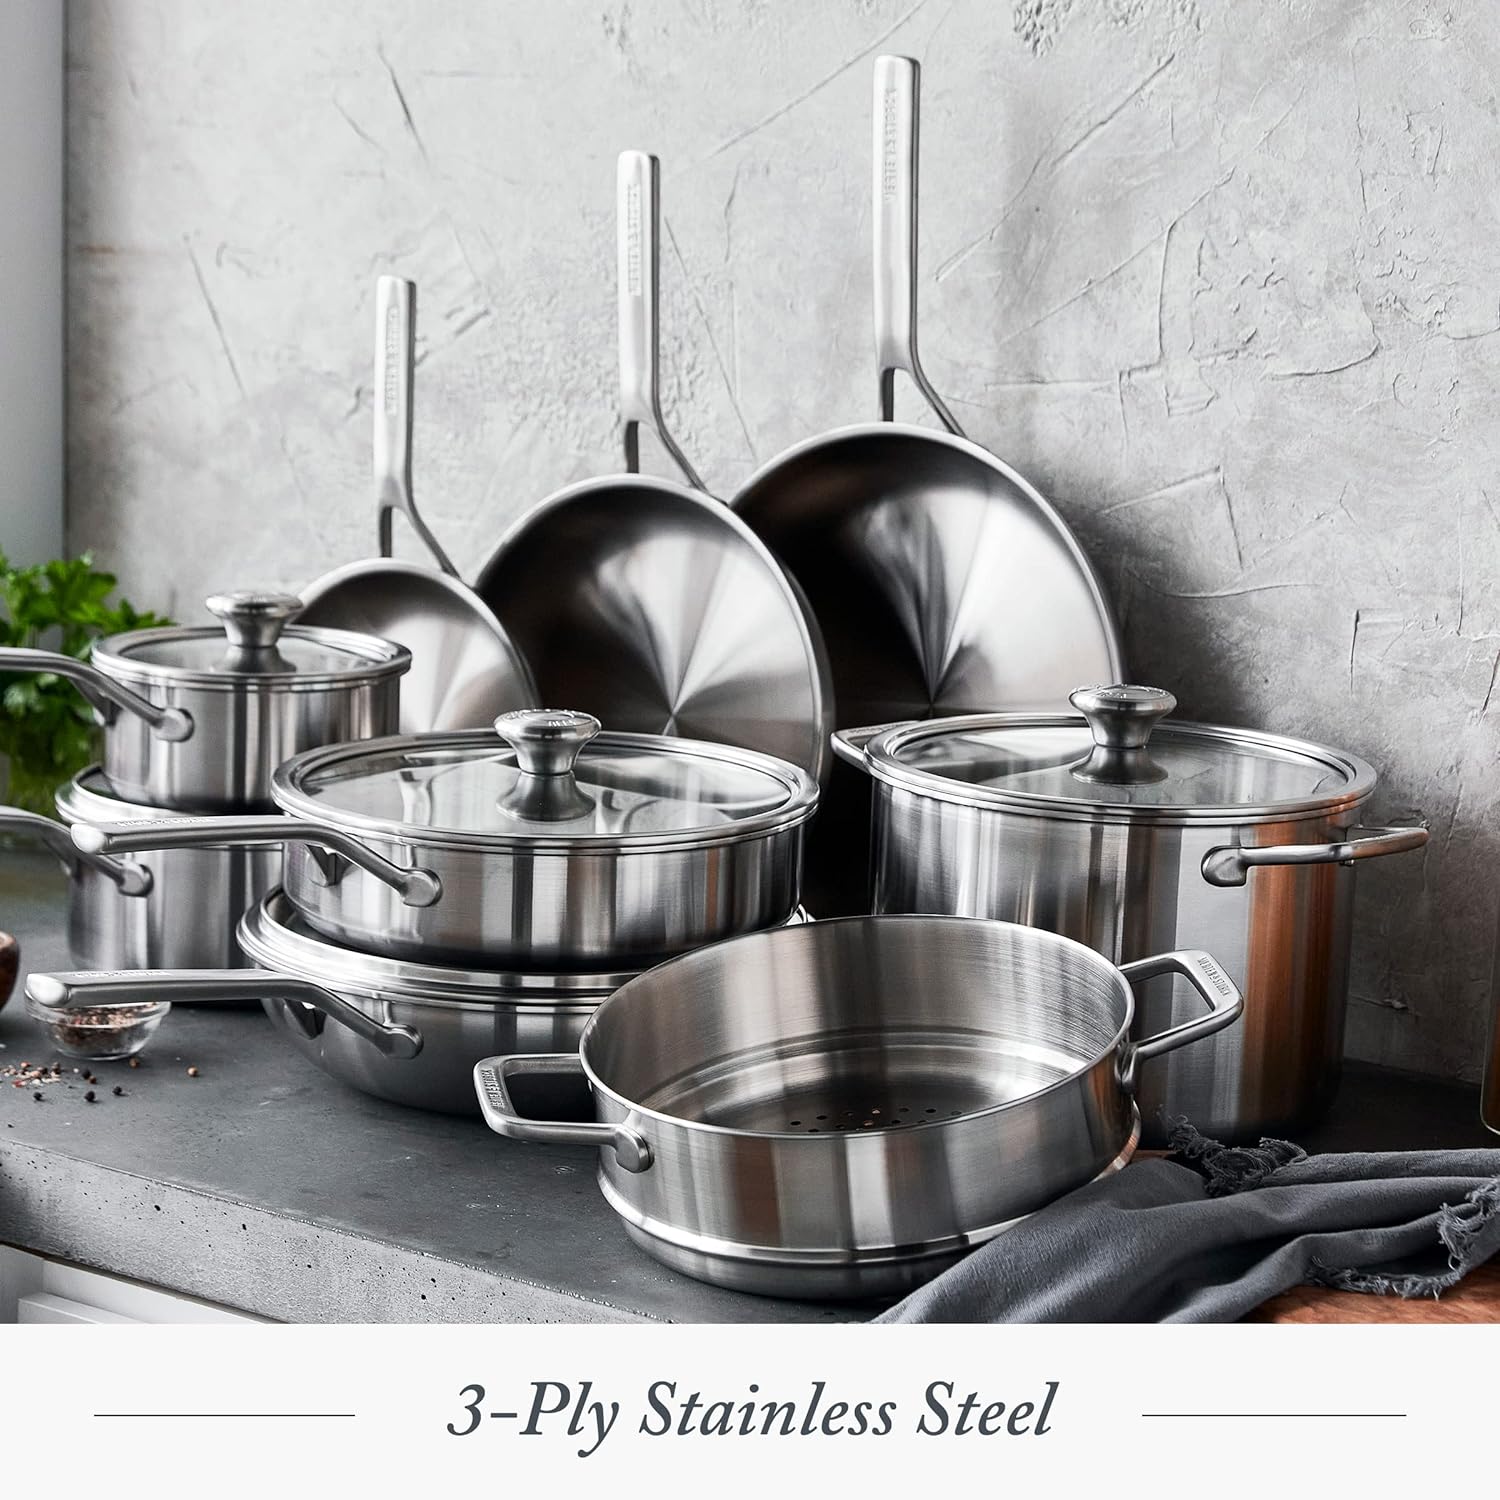 Merten & Storck Tri-Ply Stainless Steel 14 Piece Cookware Pots & Pans  Set,Professional Cooking,Multi Clad,Measurement Markings,Drip-Free Pouring  Edges,Durable Glass Lids,Induction,Oven&Dishwasher Safe